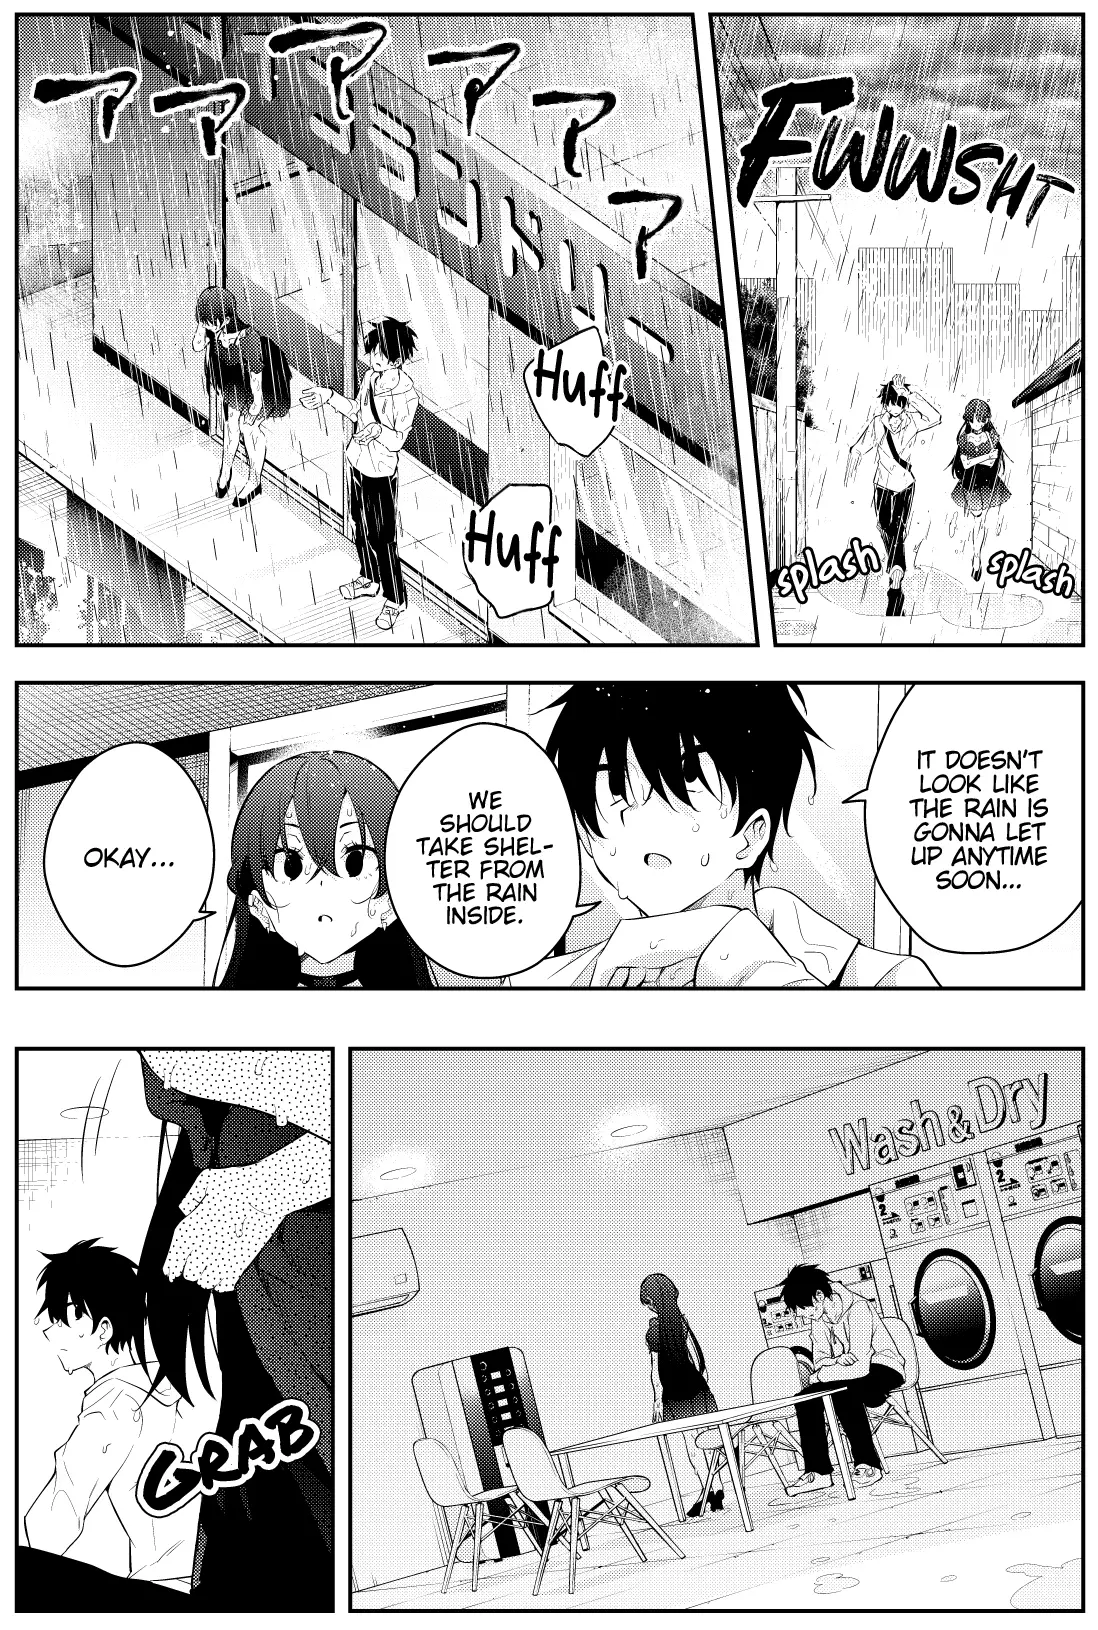 The Story Of A Manga Artist Confined By A Strange High School Girl - 45 page 3-4334a5b1